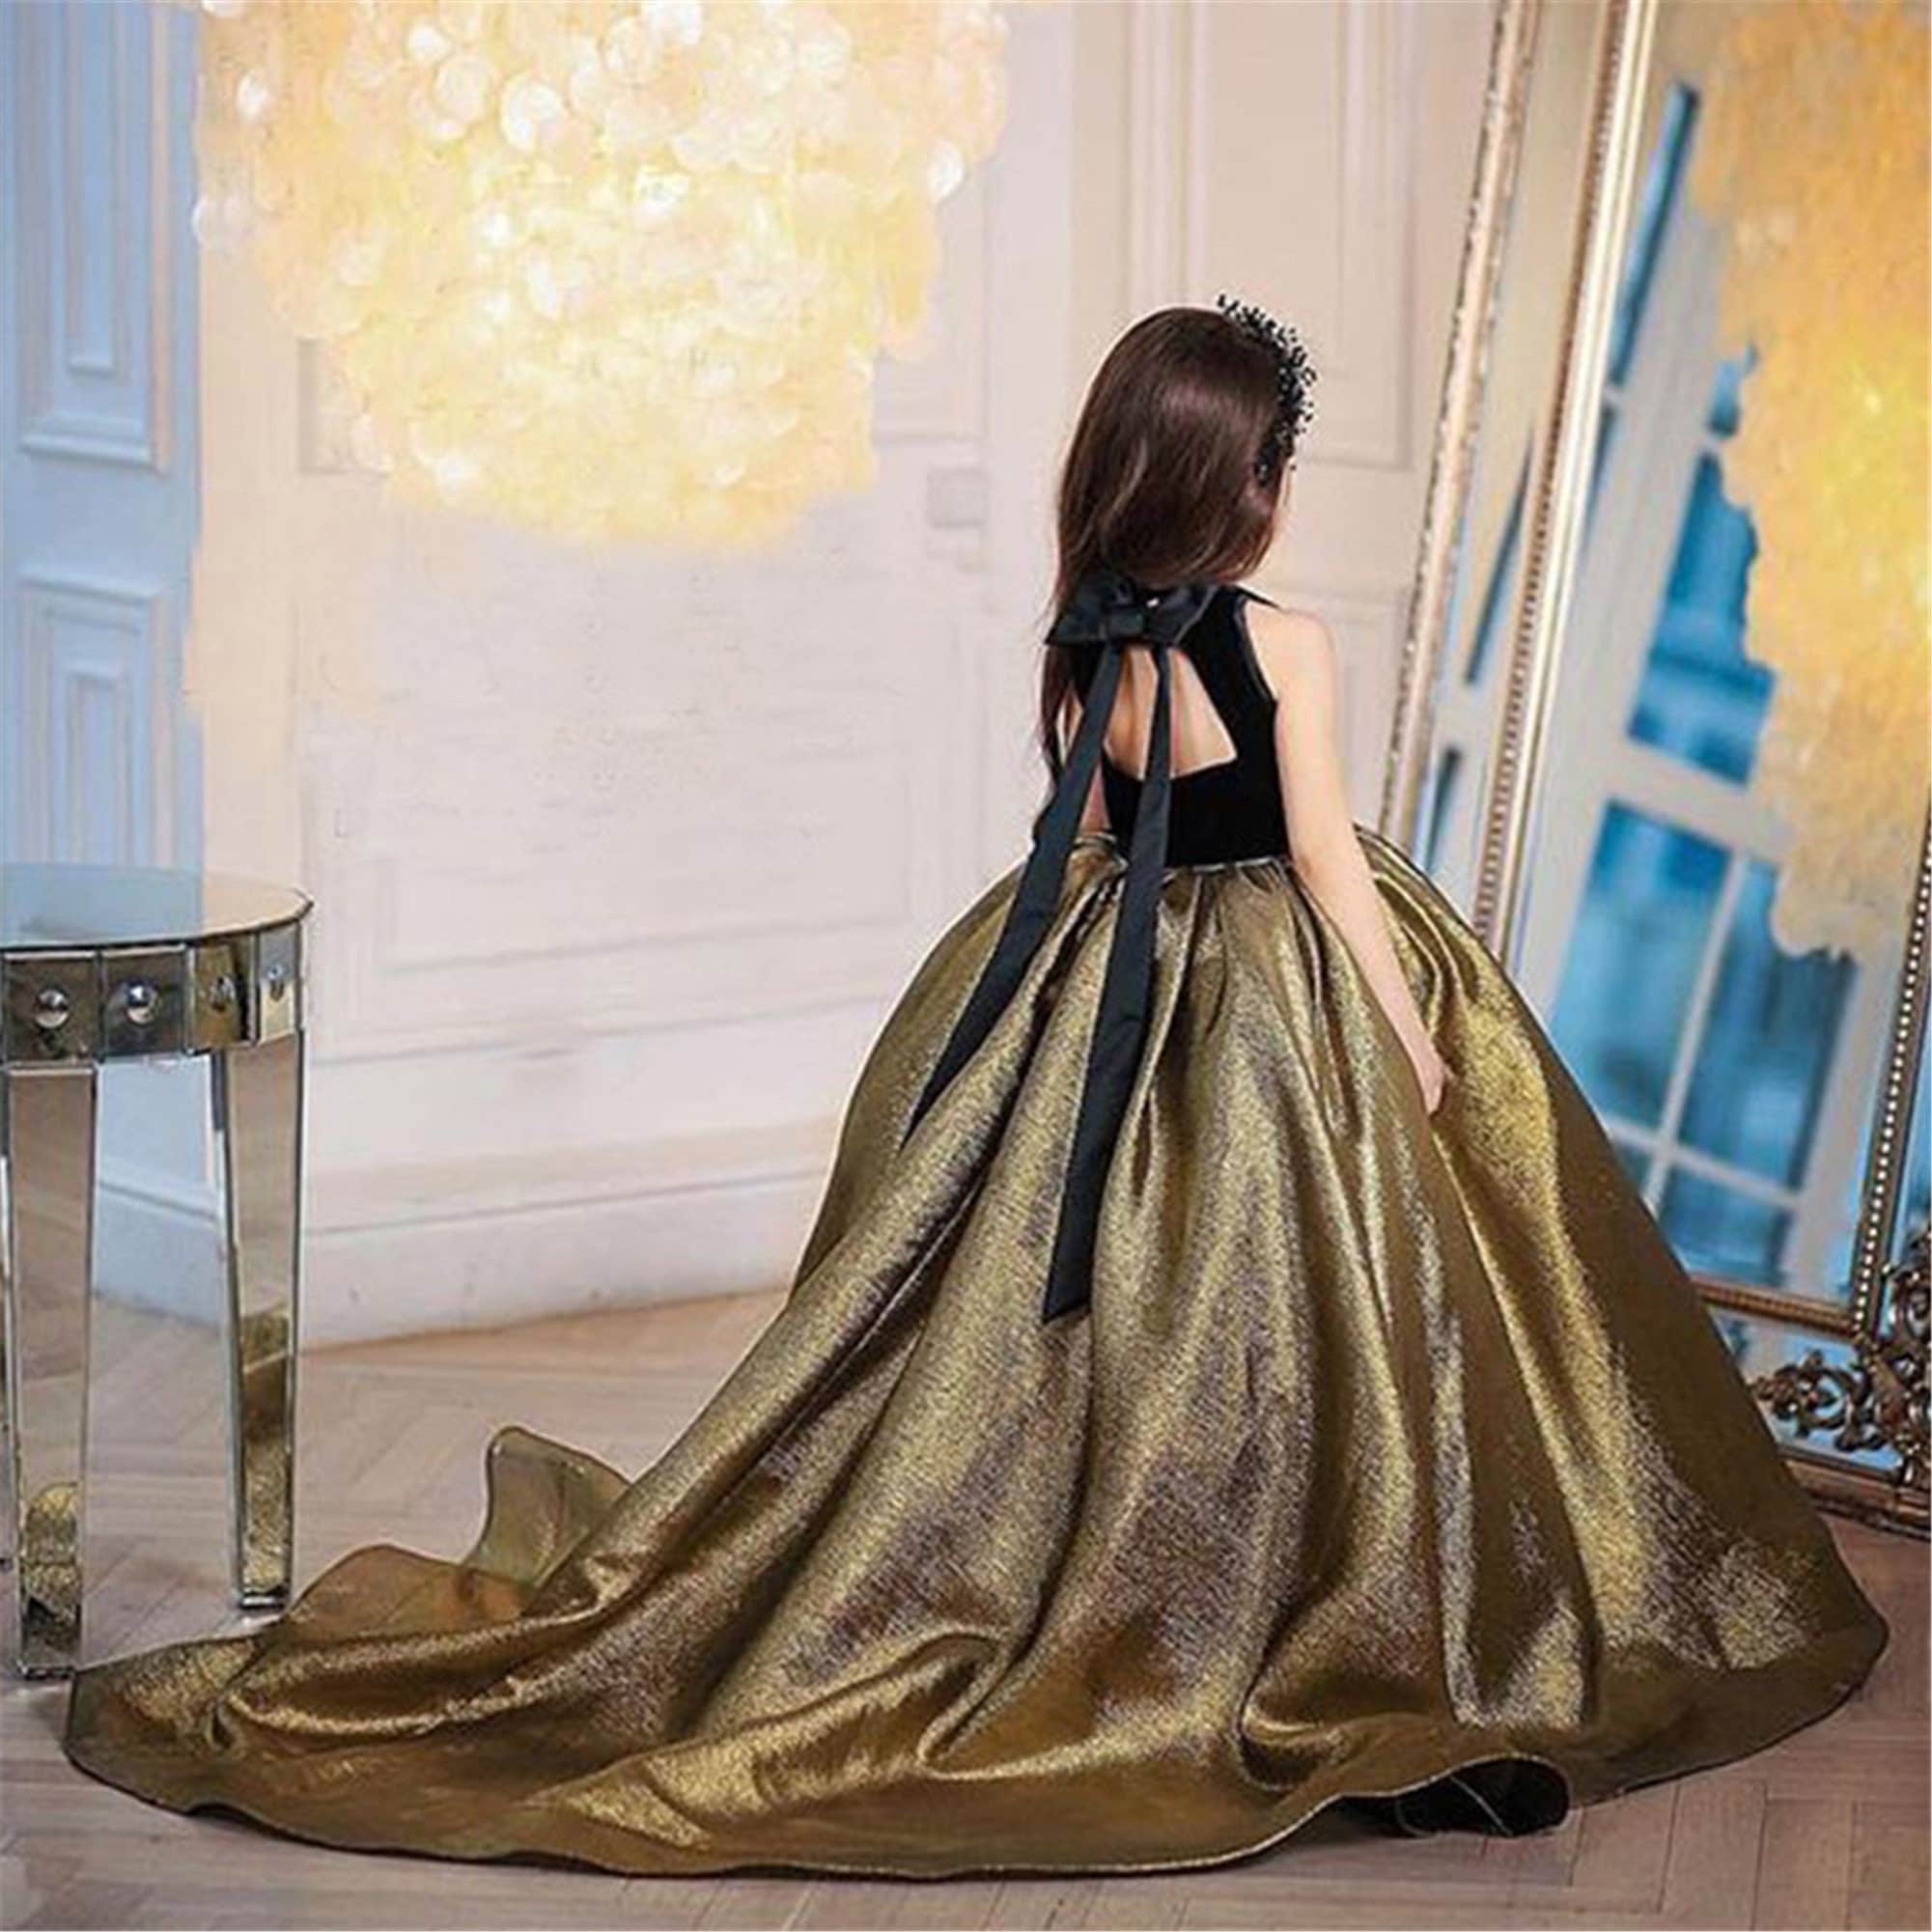 Discover 122+ black and gold long gown